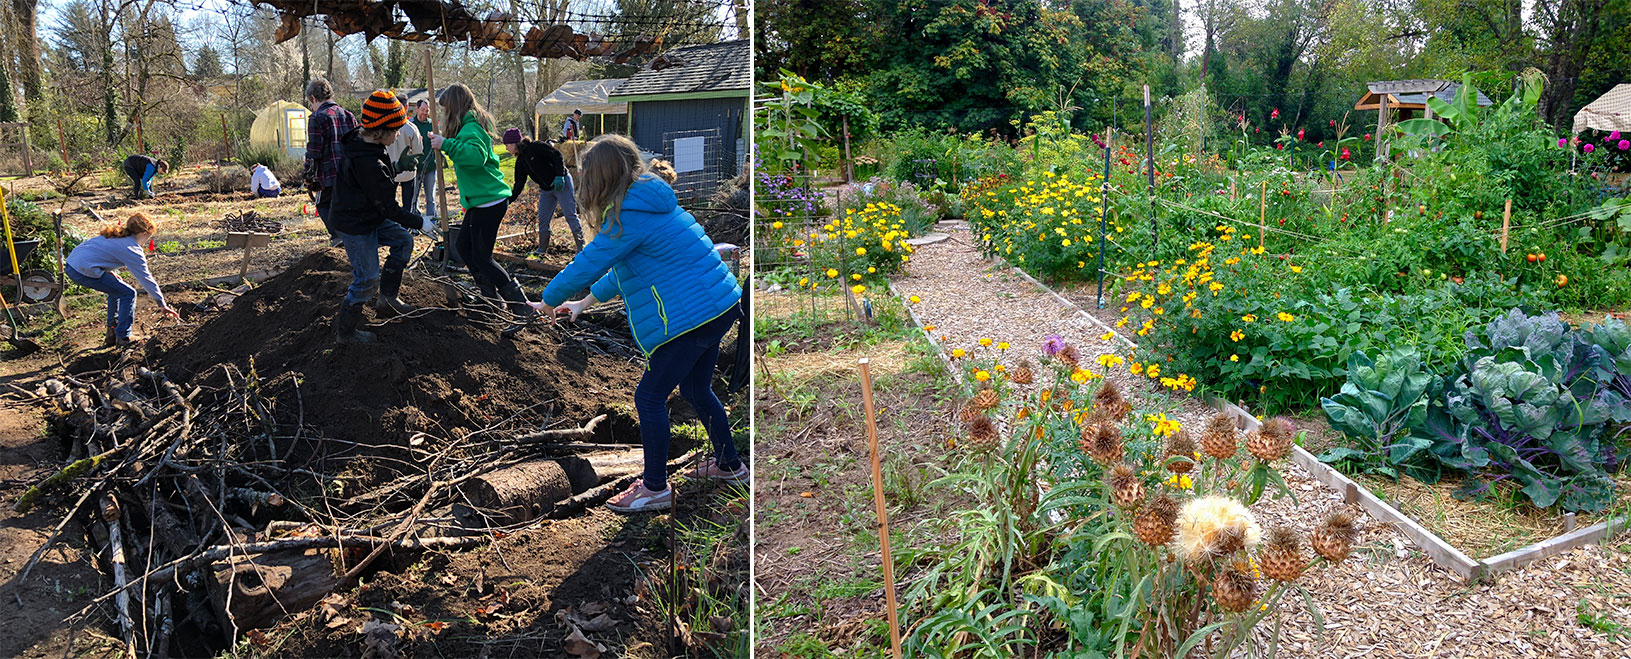 On the left, students stand atop mounds of earth and branches, as they compact them. On the right, the garden after the mounds were finished, with a gently-rolling surface covered in flower beds with colorful blooms.